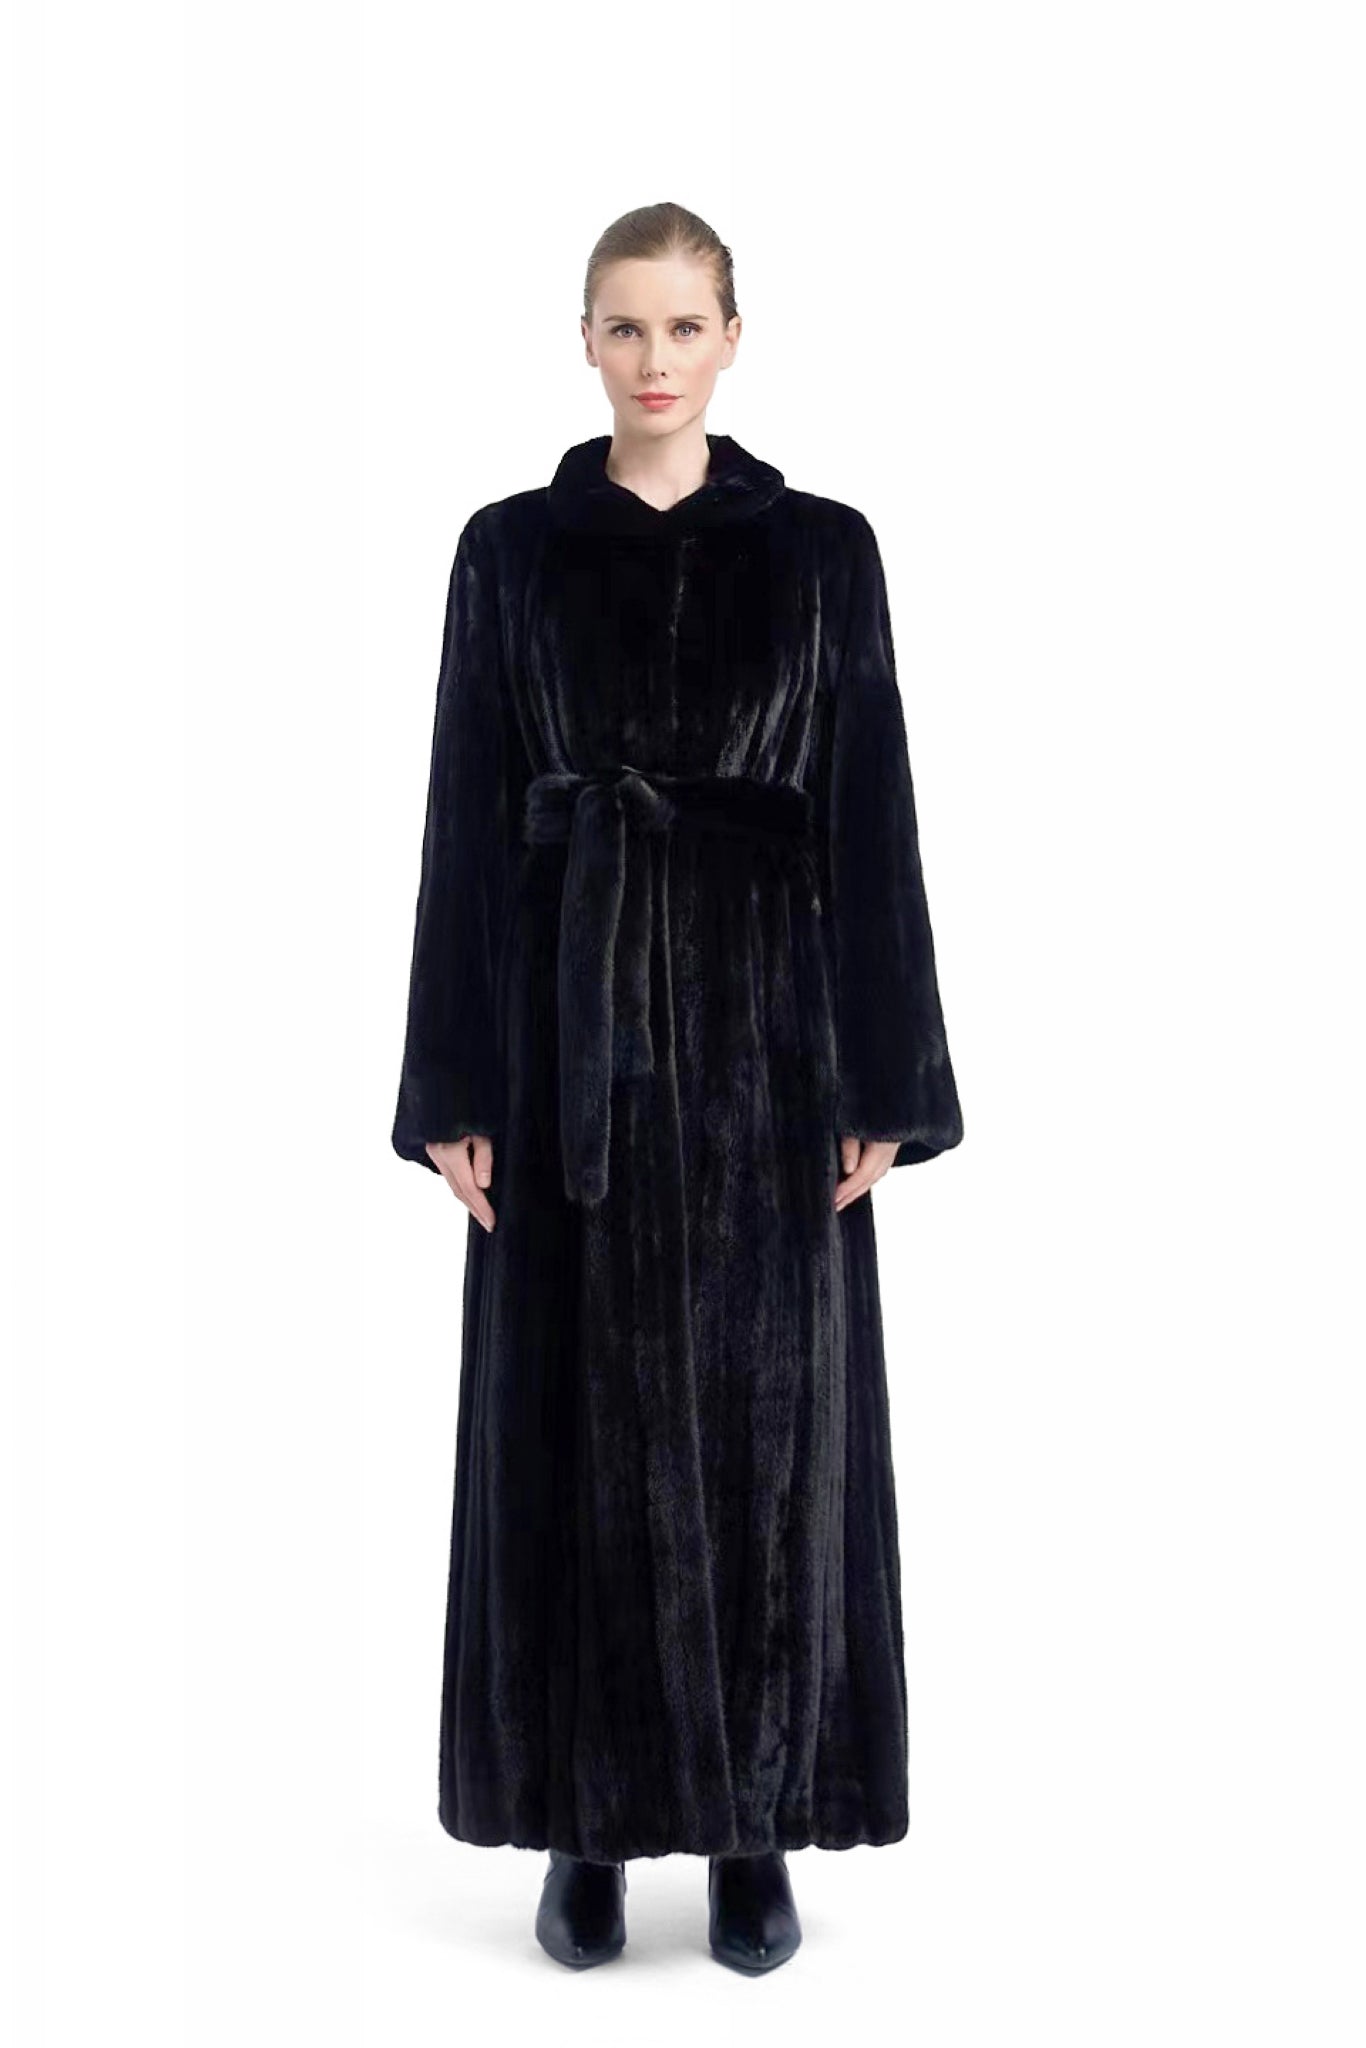 Stylish Long Mink Fur Coat with Soft Material Ideal for Women's Winter Outfits